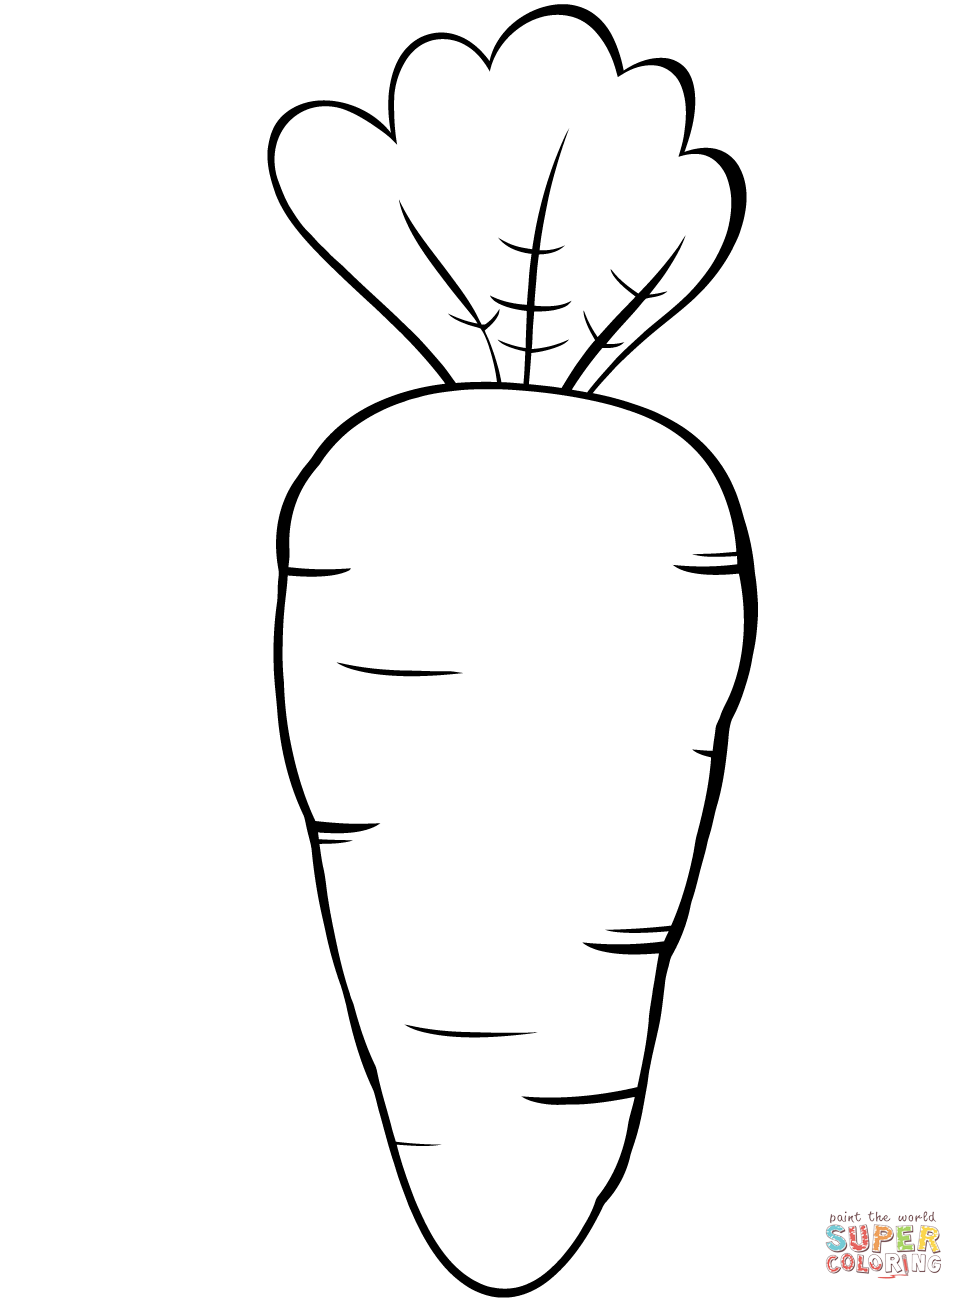 Carrot coloring page free. Carrots clipart printable